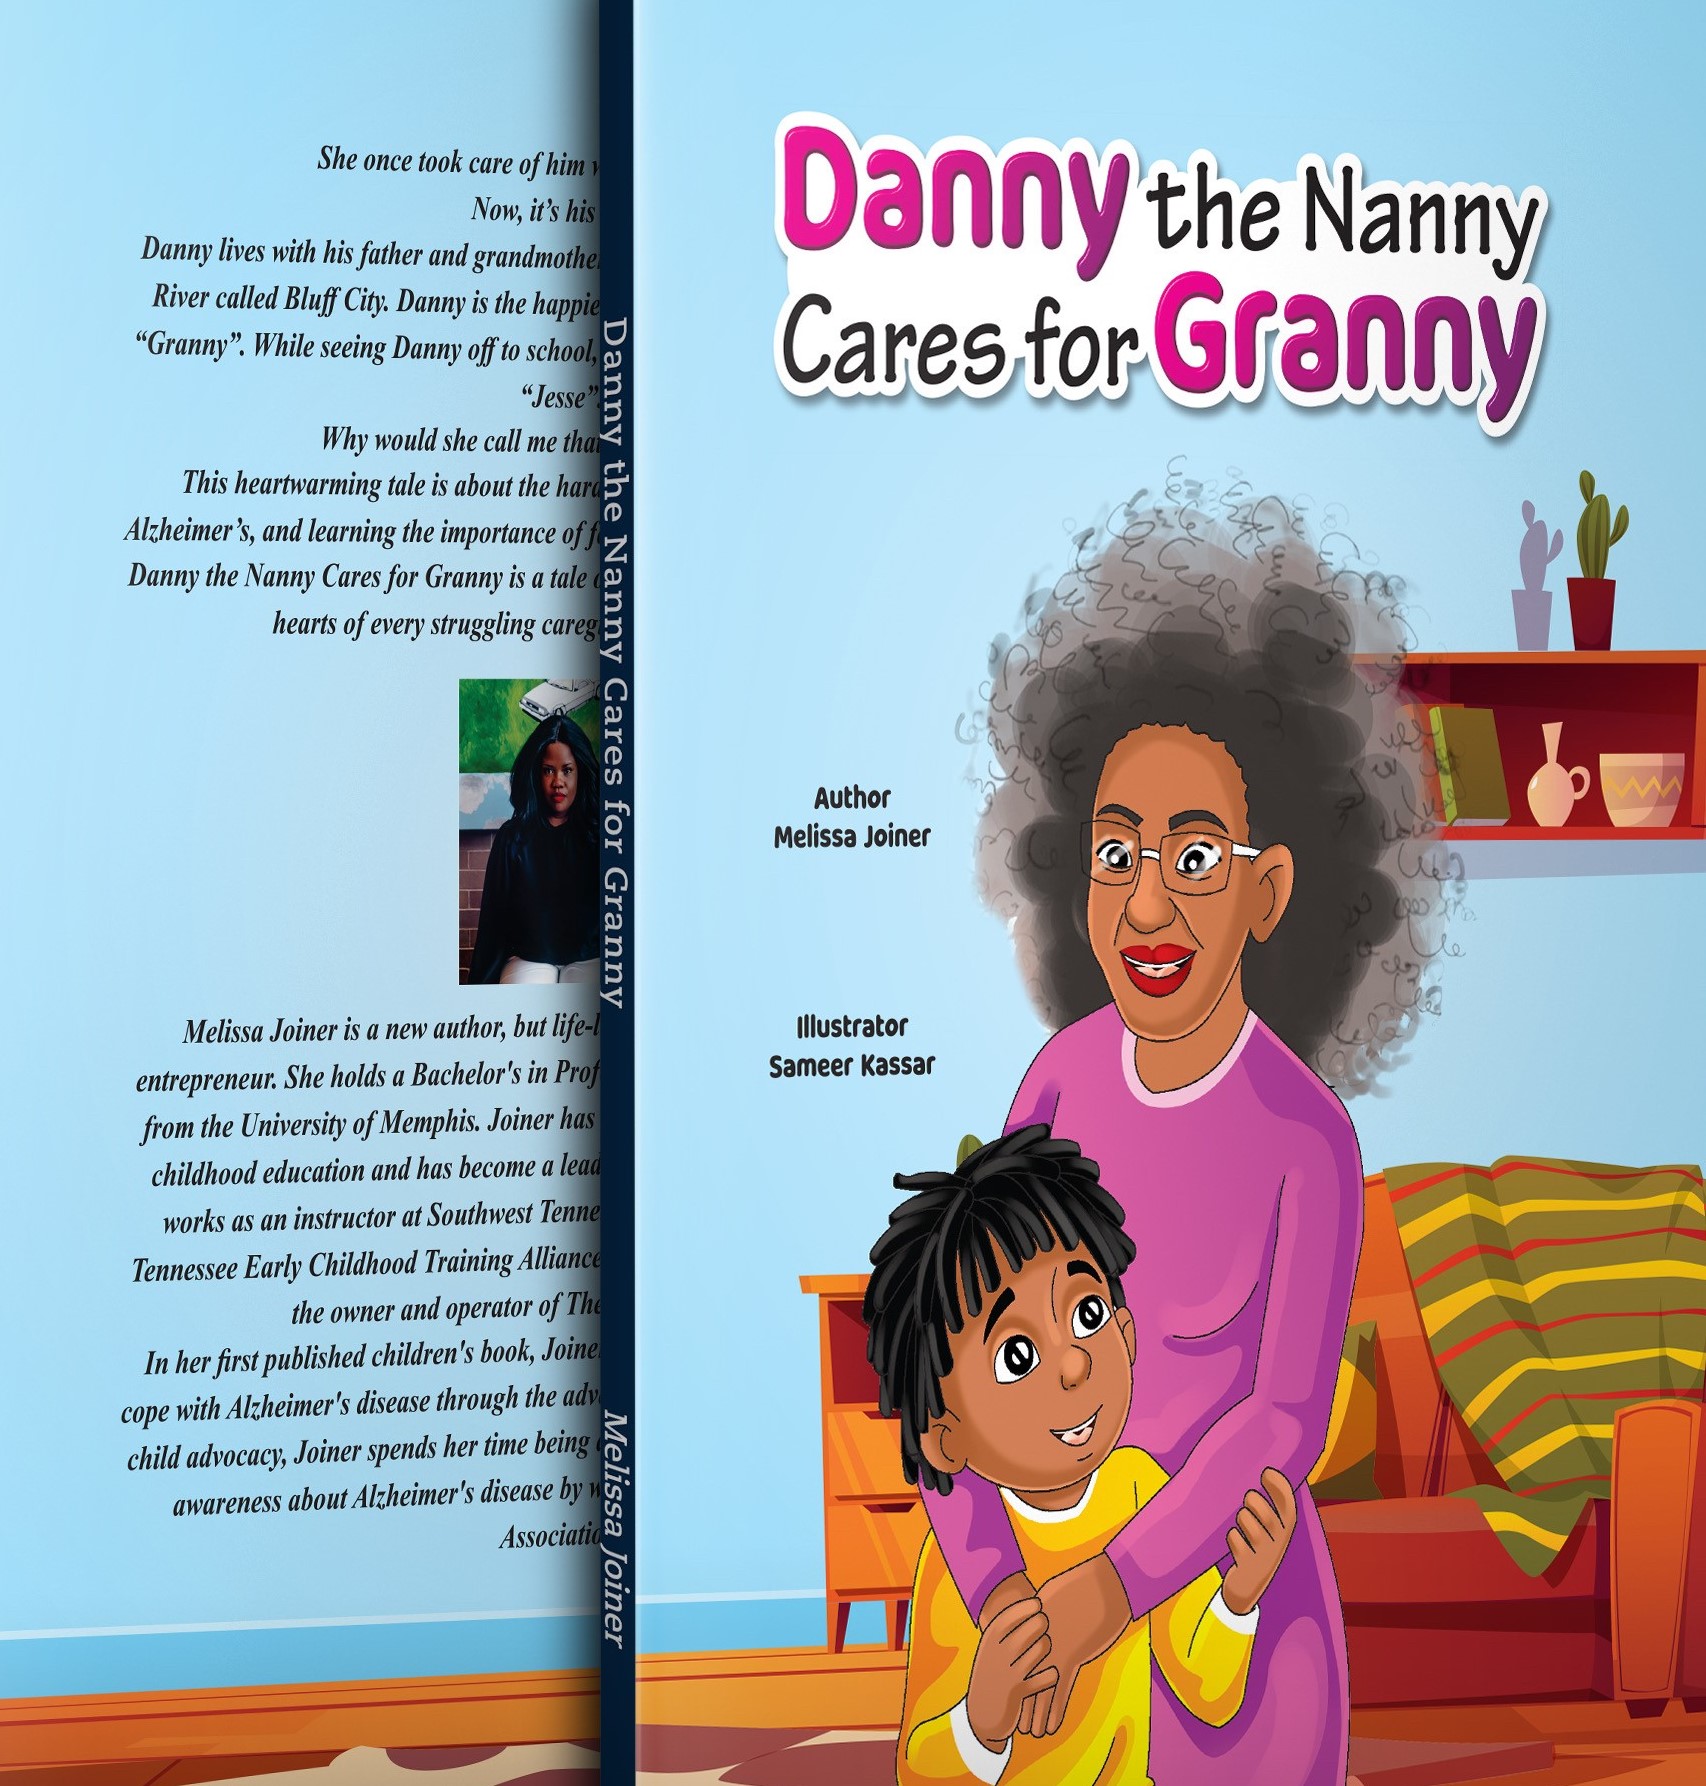 TECTA Coordinator Melissa Joiner wrote and published Danny the Nanny Cares for Granny, a children’s book on Alzheimer’s disease.